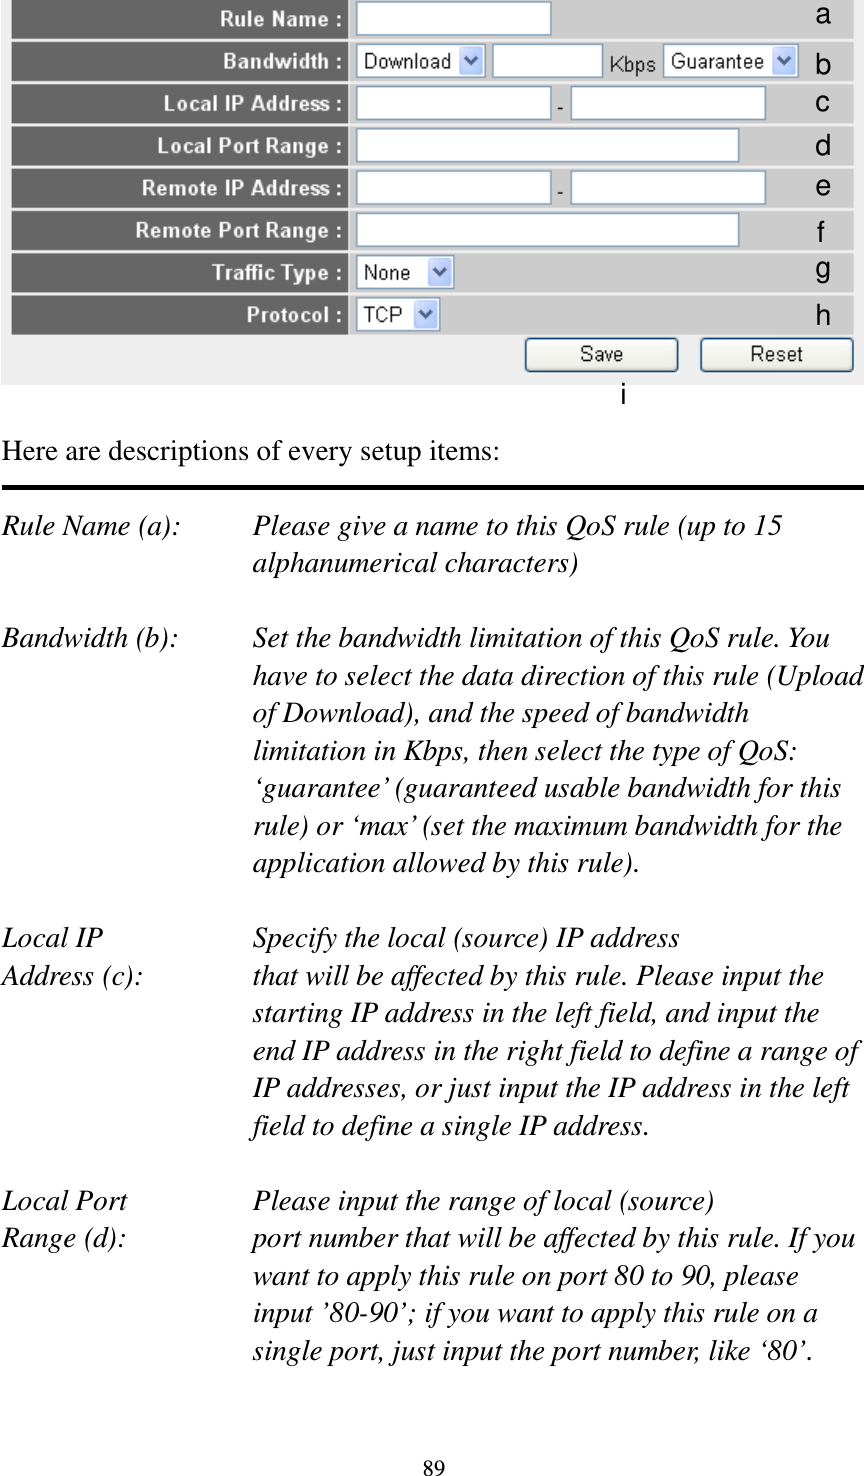 89   Here are descriptions of every setup items:  Rule Name (a):    Please give a name to this QoS rule (up to 15 alphanumerical characters)  Bandwidth (b):    Set the bandwidth limitation of this QoS rule. You have to select the data direction of this rule (Upload of Download), and the speed of bandwidth limitation in Kbps, then select the type of QoS: ‘guarantee’ (guaranteed usable bandwidth for this rule) or ‘max’ (set the maximum bandwidth for the application allowed by this rule).  Local IP        Specify the local (source) IP address Address (c):     that will be affected by this rule. Please input the starting IP address in the left field, and input the end IP address in the right field to define a range of IP addresses, or just input the IP address in the left field to define a single IP address.  Local Port       Please input the range of local (source) Range (d):    port number that will be affected by this rule. If you want to apply this rule on port 80 to 90, please input ’80-90’; if you want to apply this rule on a single port, just input the port number, like ‘80’.  a b c d e f g h i